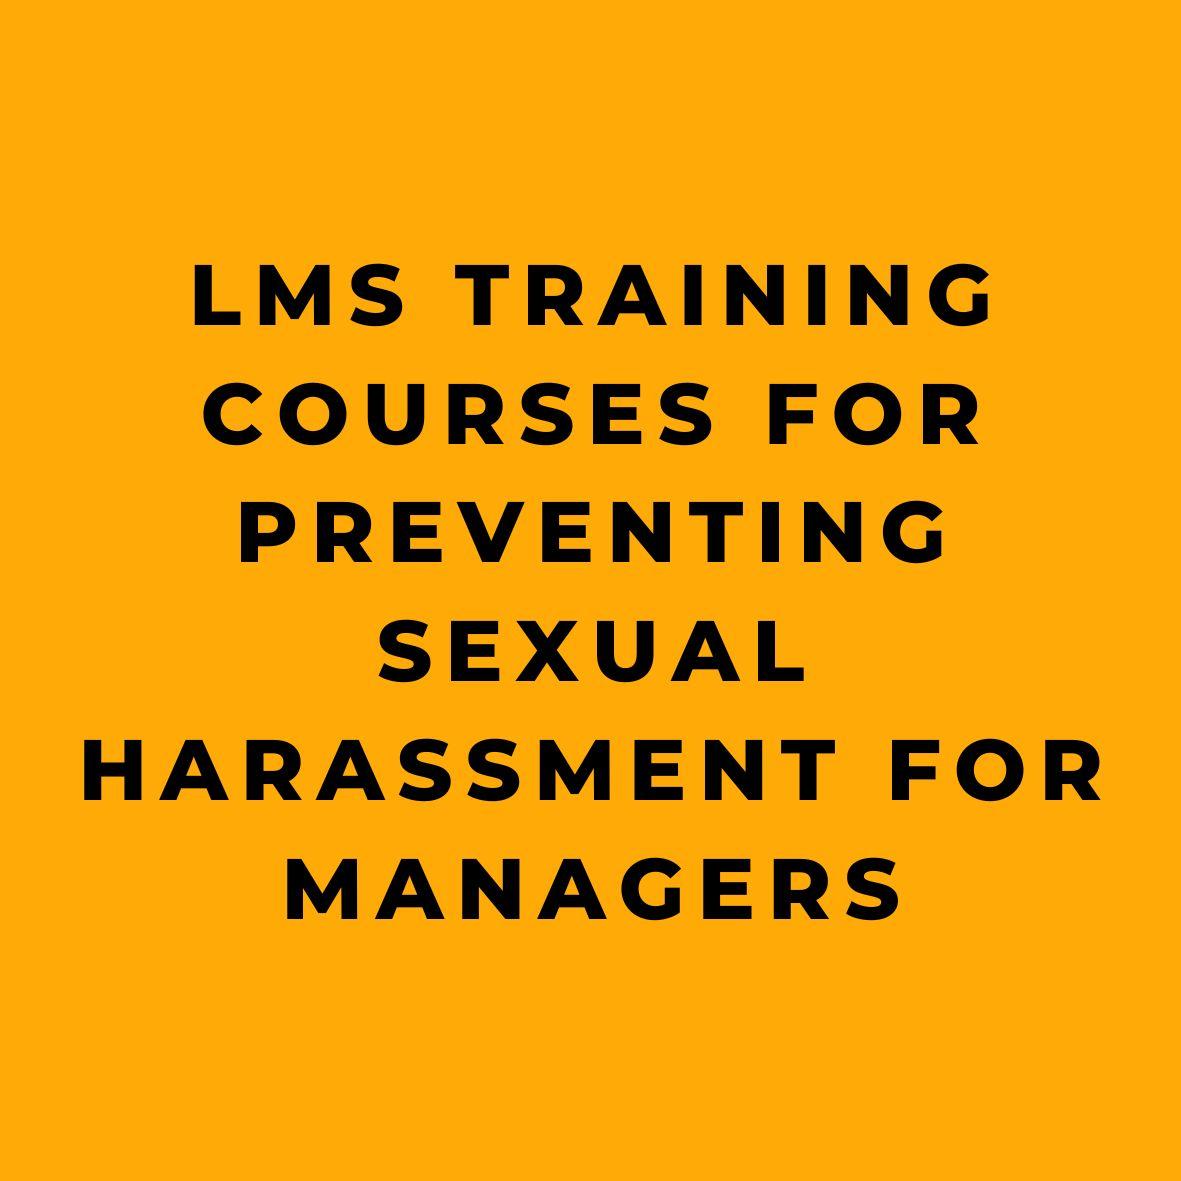 LMS Training Courses For Preventing Sexual Harassment for Managers